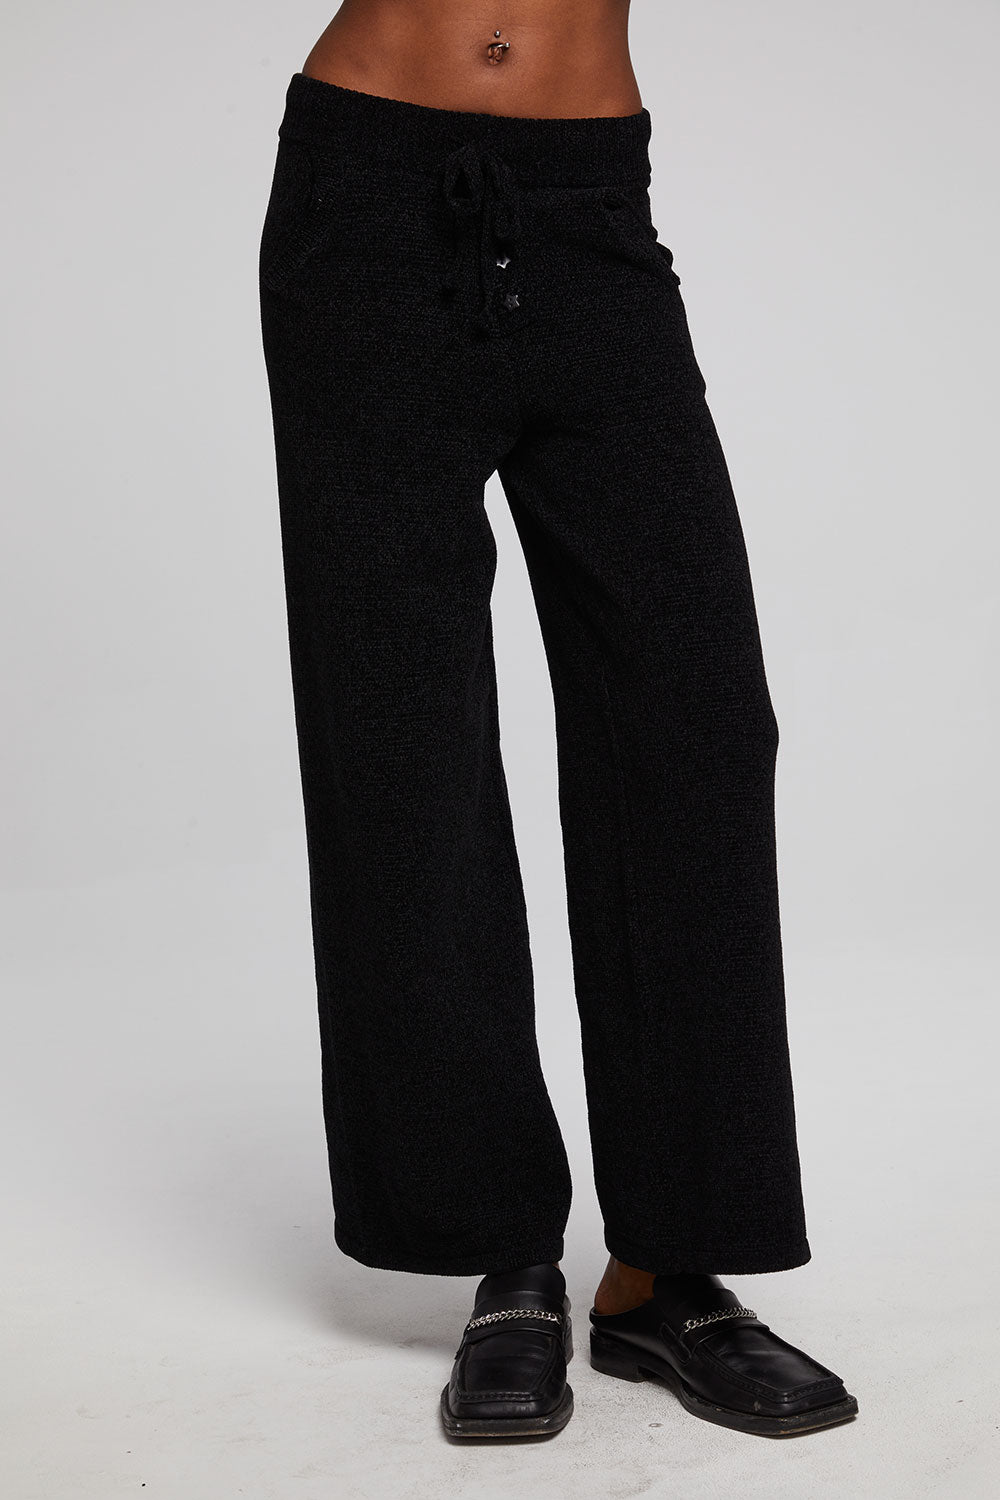 Chestnut Licorice Joggers WOMENS chaserbrand